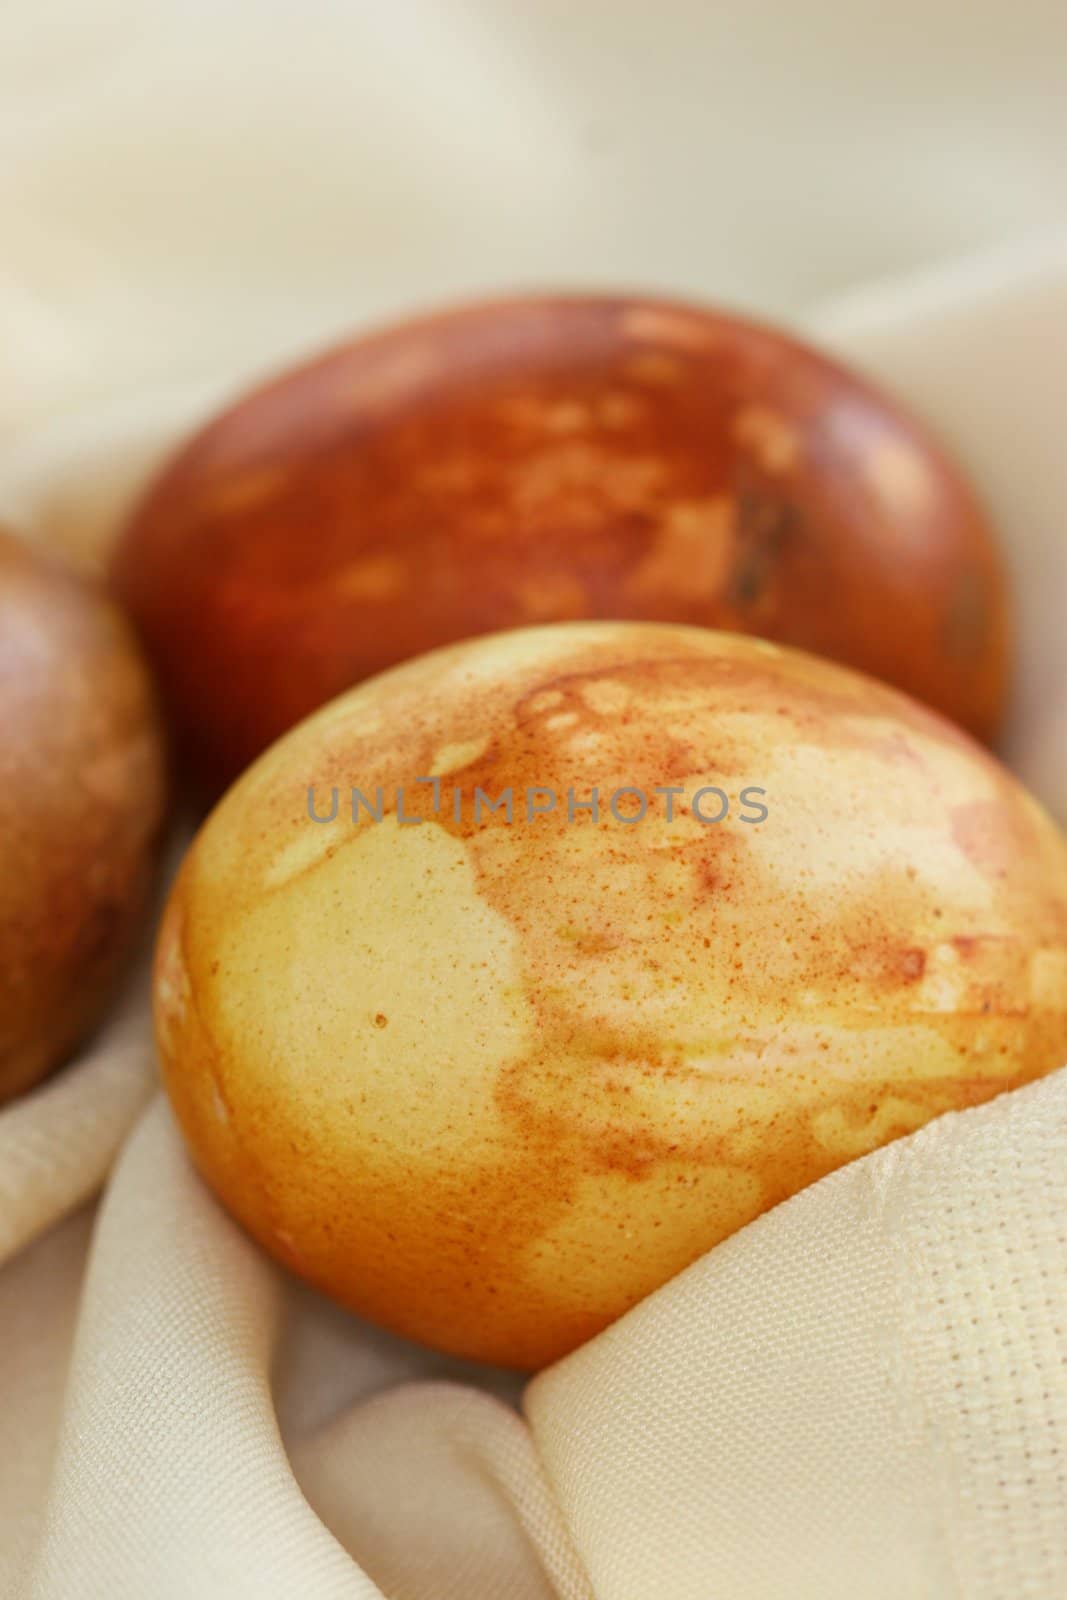 Naturally dyed easter eggs - the eggs are colored with various leaves and flowers such as roses